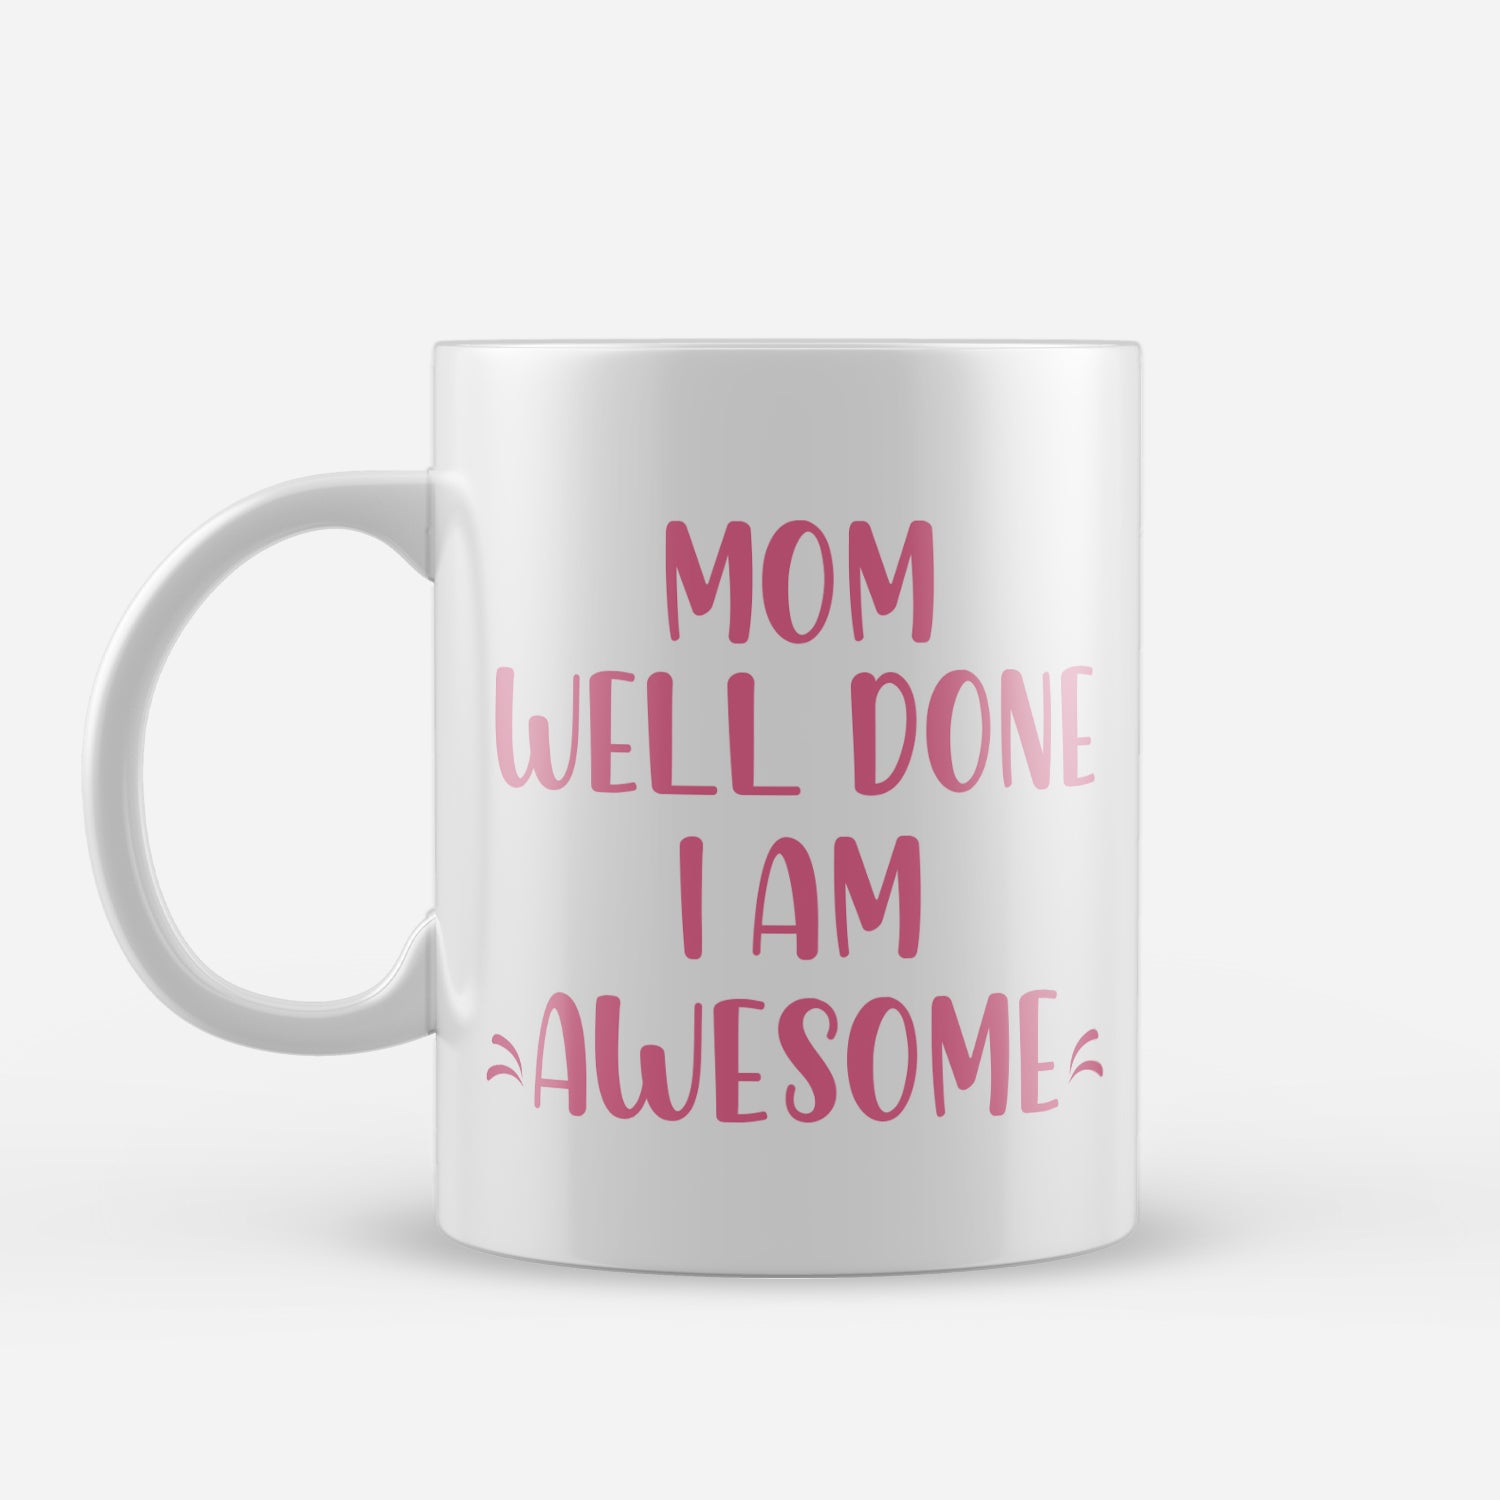 "Mom well done I am Awesome" Mother's Day theme Ceramic Coffee Mugs 2